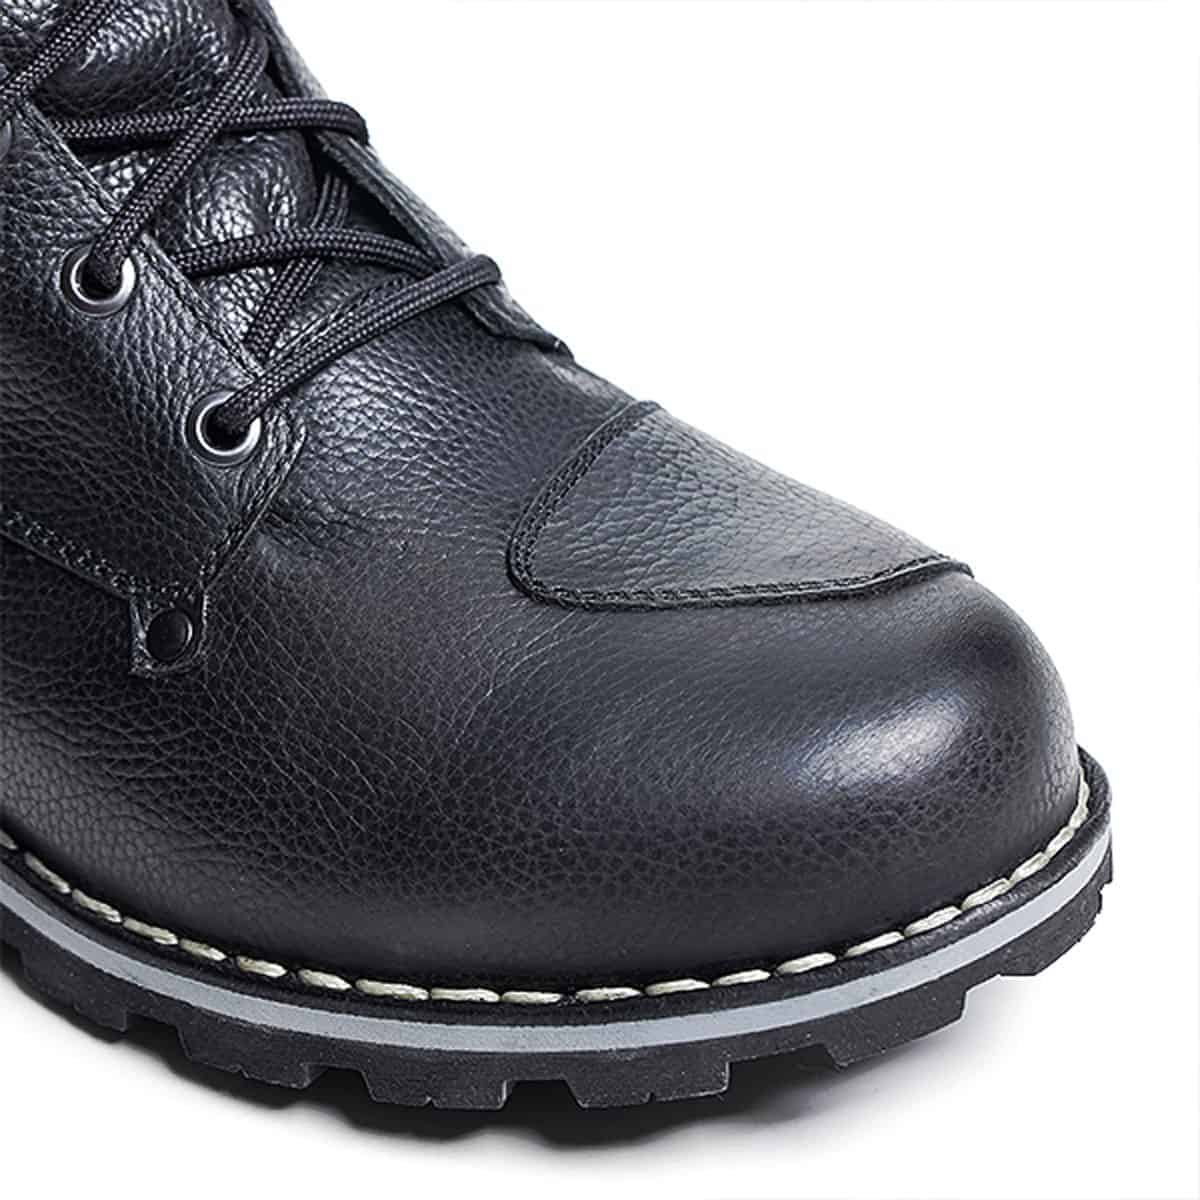 The TCX Hero 2 motorbike boots: Casual motorcycle footwear crafted from the best components - toes